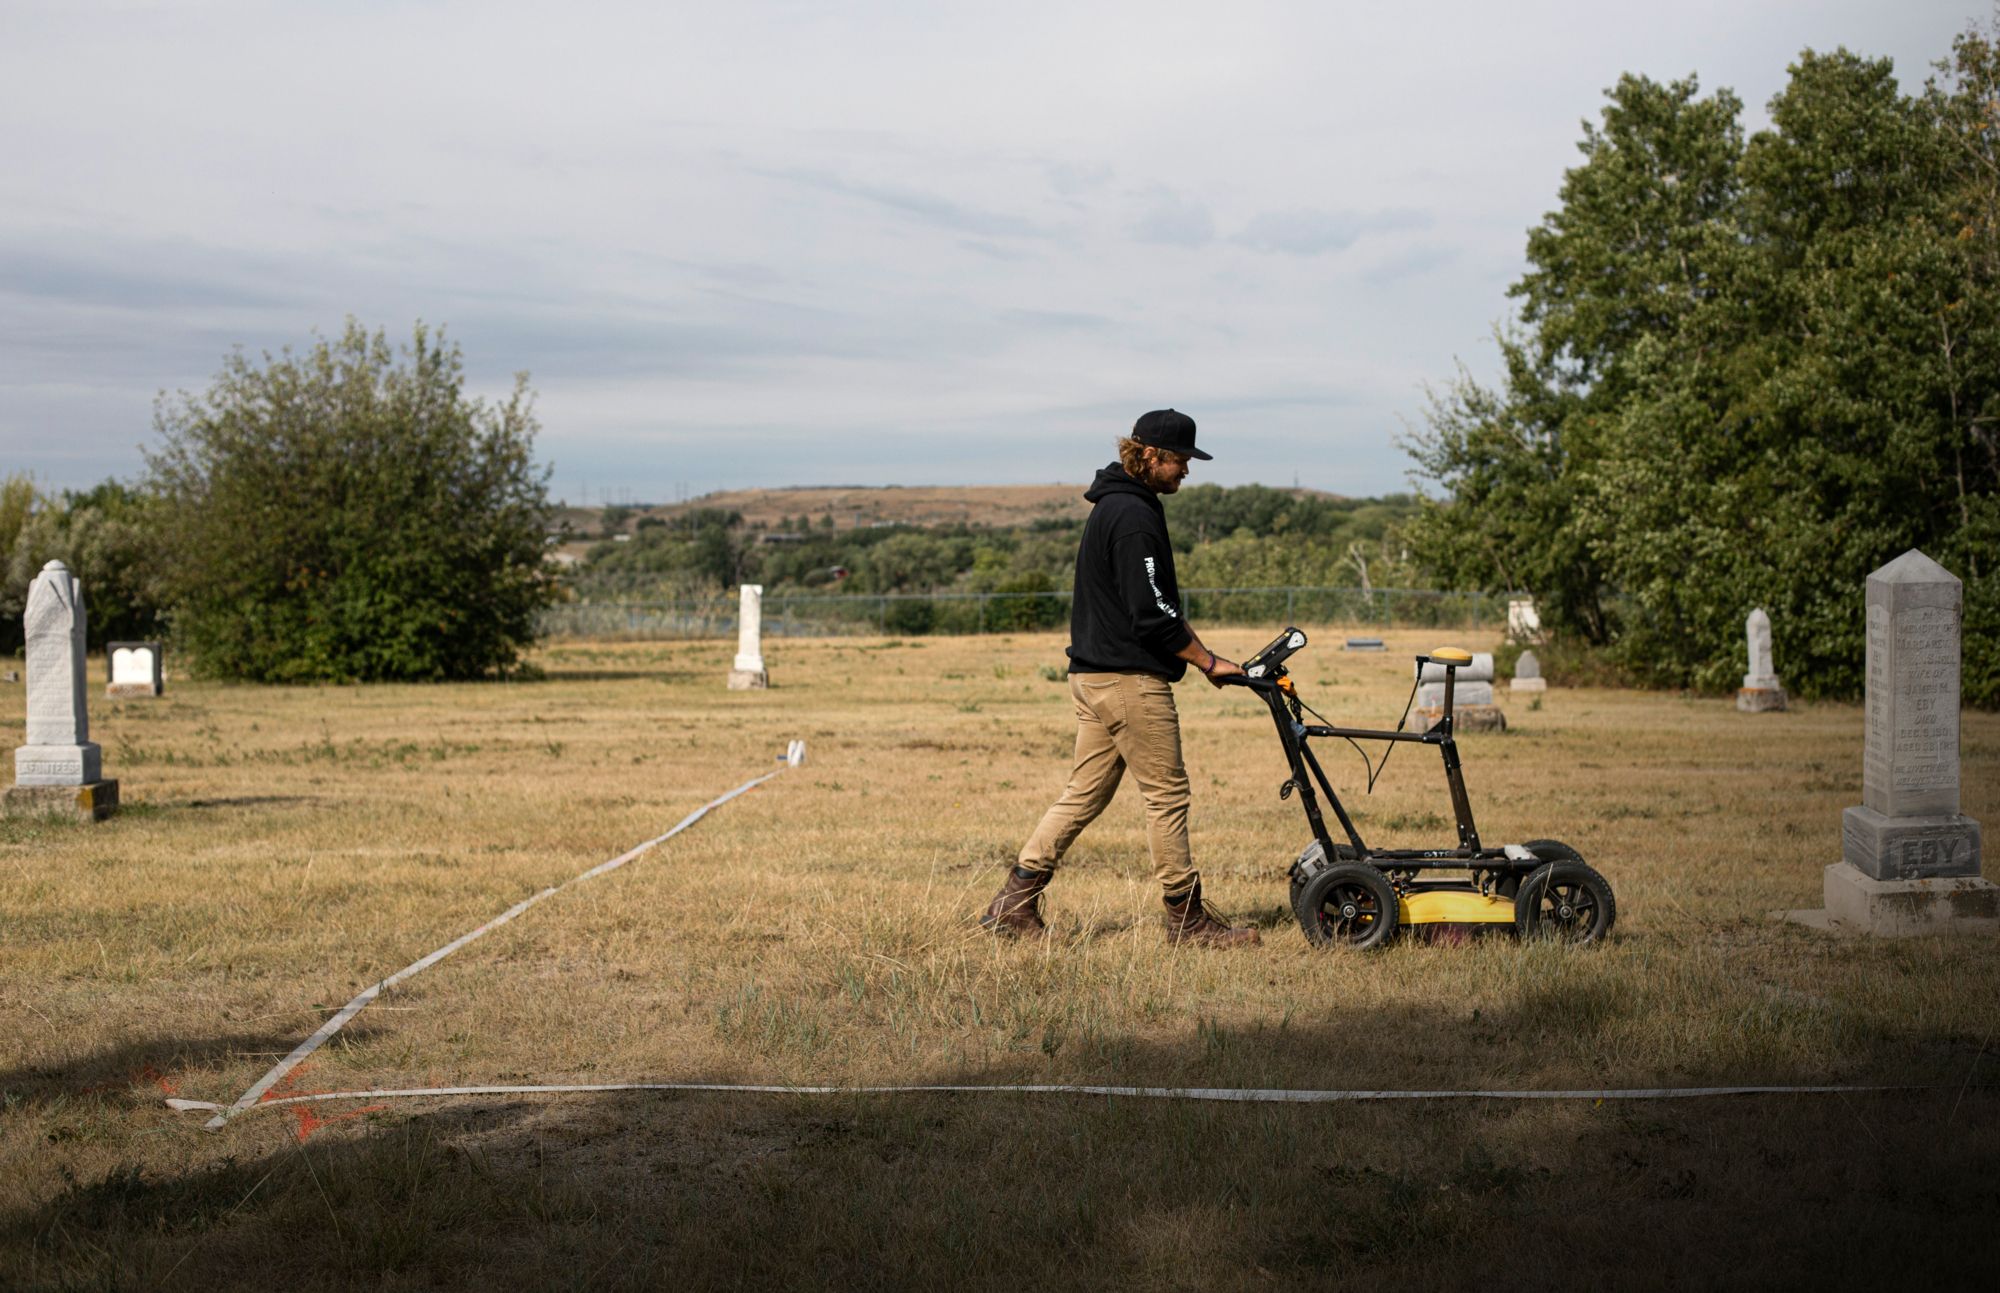 jordan swenson demonstrates how he collects data with ground penetrating radar, at nutana cemetery, a historical burial ground dating back to 1884, in saskatoon, saskatchewan monday, august 23, 2021 the technology has been behind many of the discoveries of unmarked graves at former indian residential schools, but reliably identifying graves requires direction from both oral histories, and a careful interpretation of data